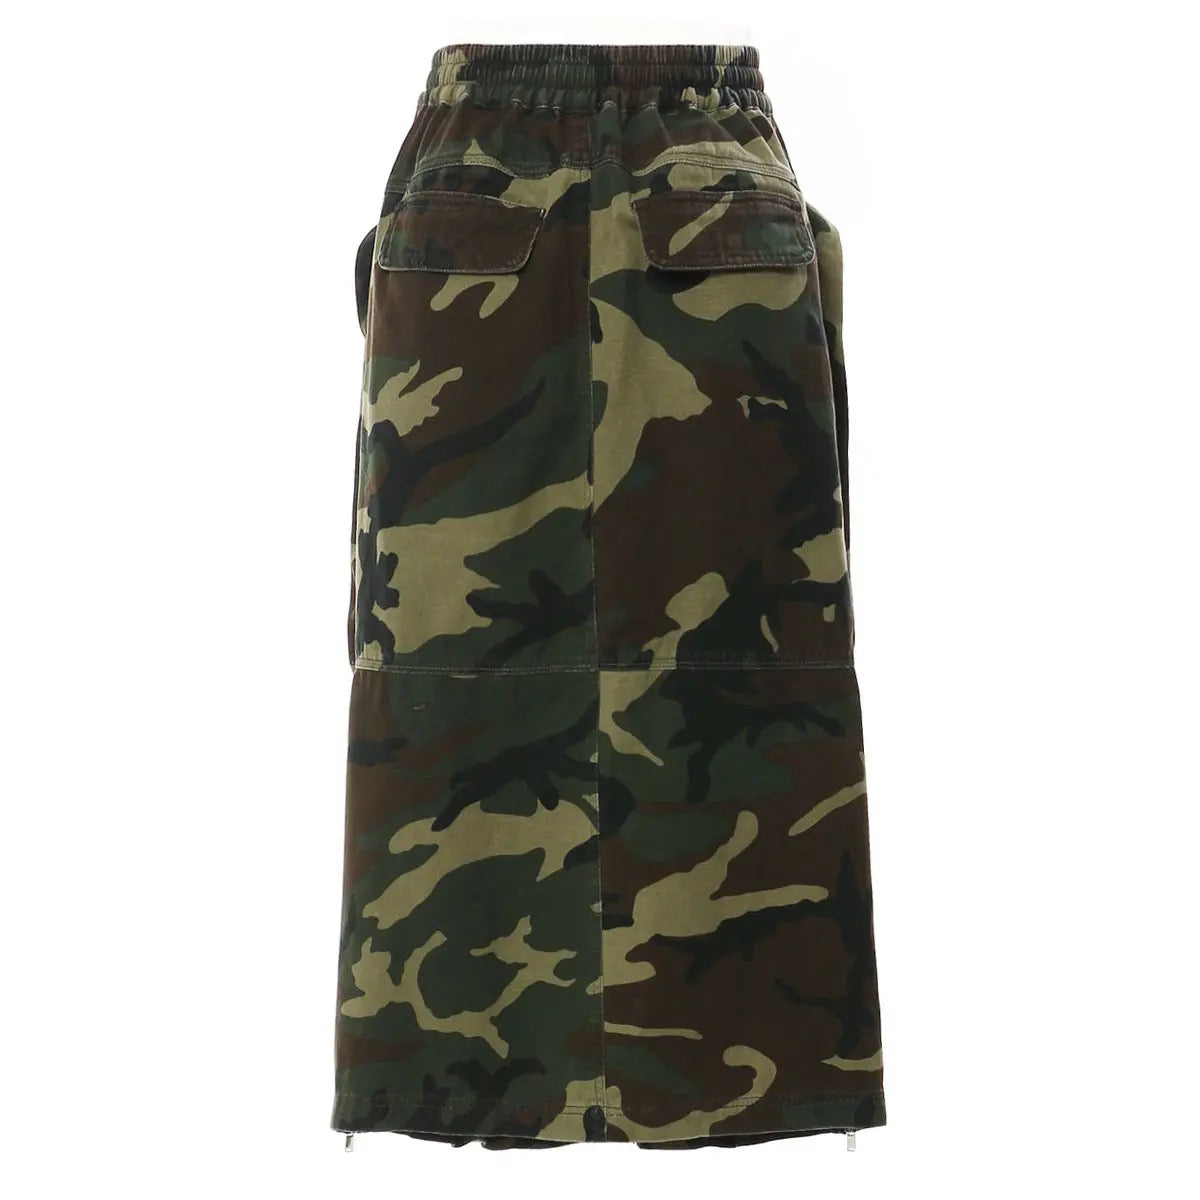 GOLDxTEAL camouflage pocket midi skirt. Stylish camouflage print skirt accented with oversized pockets.